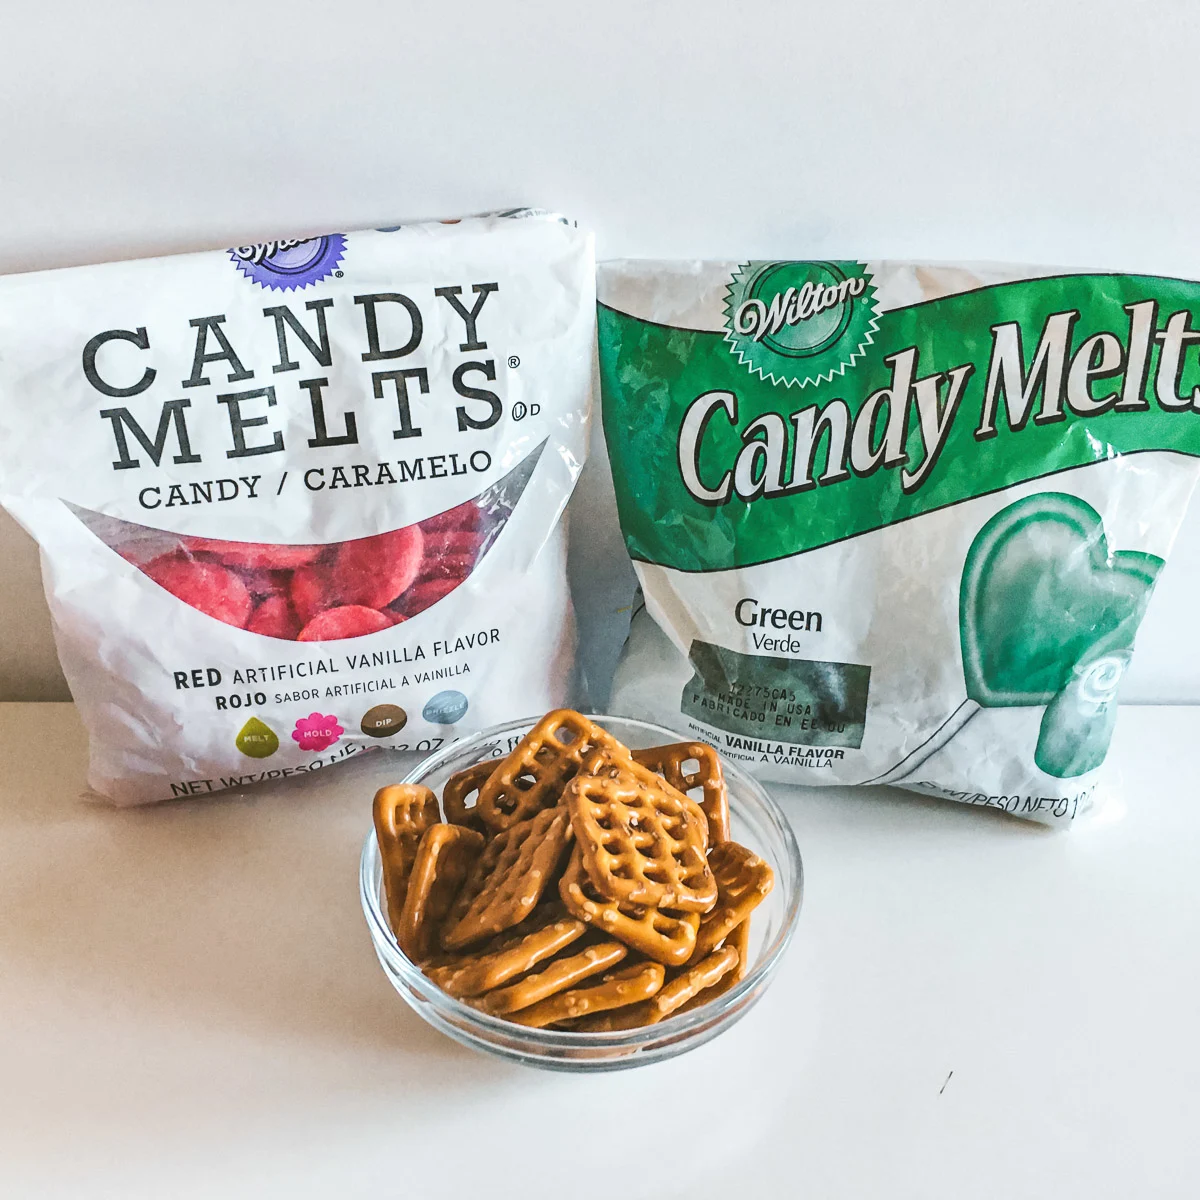 square pretzels and 2 bags of candy melts